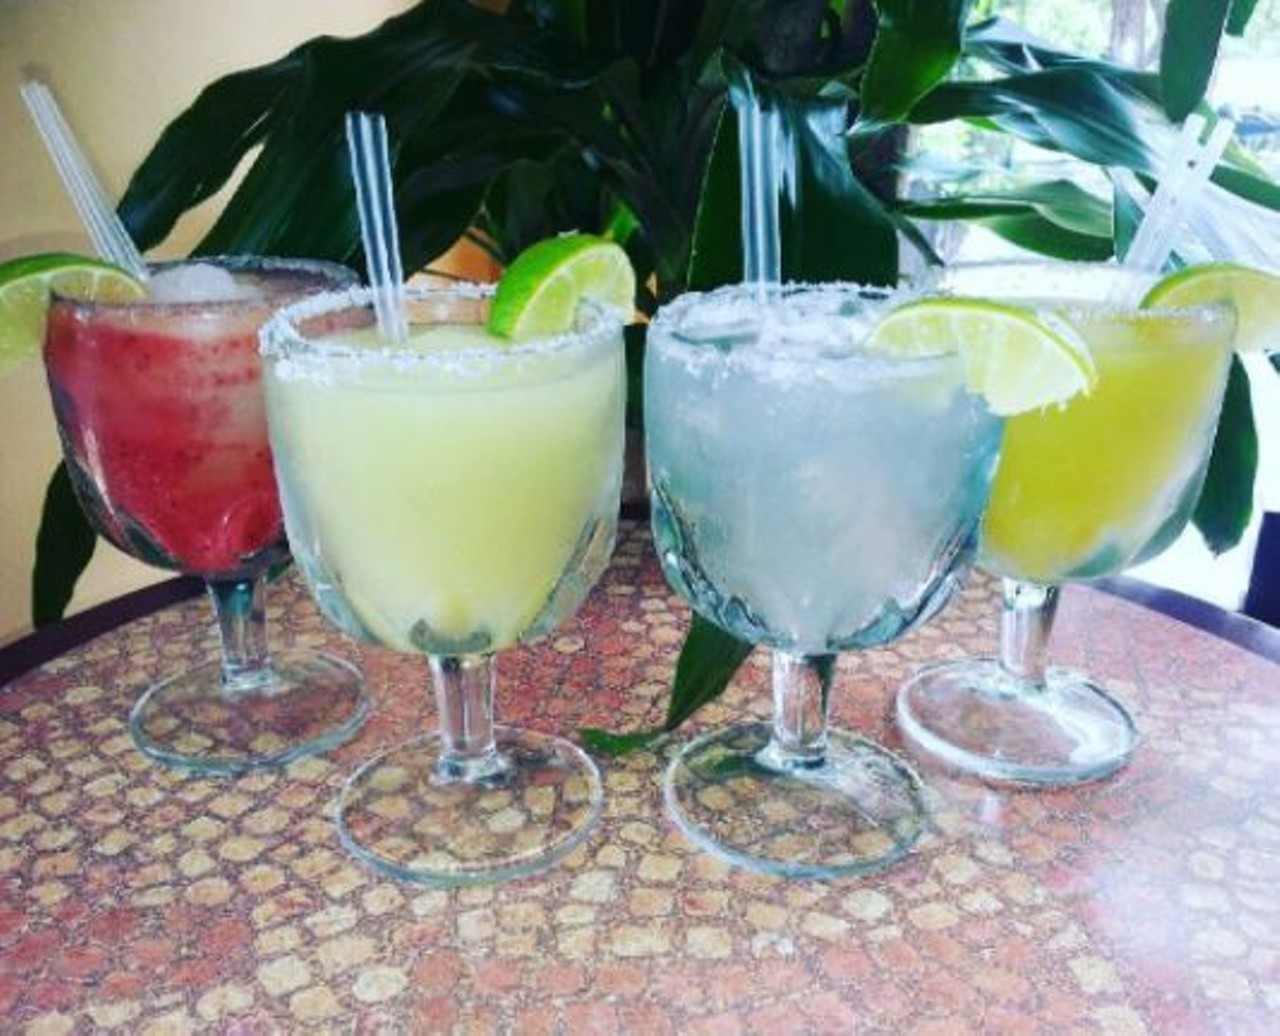 Los Barrios
4223 Blanco Road, (210) 732-6017
Make sure to get your margarita fix on Wednesdays, when happy hour starts at 2 p.m. and lasts all night. It&#146;s a good treat to help you get through the rest of the work week.
Photo via Instagram, losbarriosrestaurant